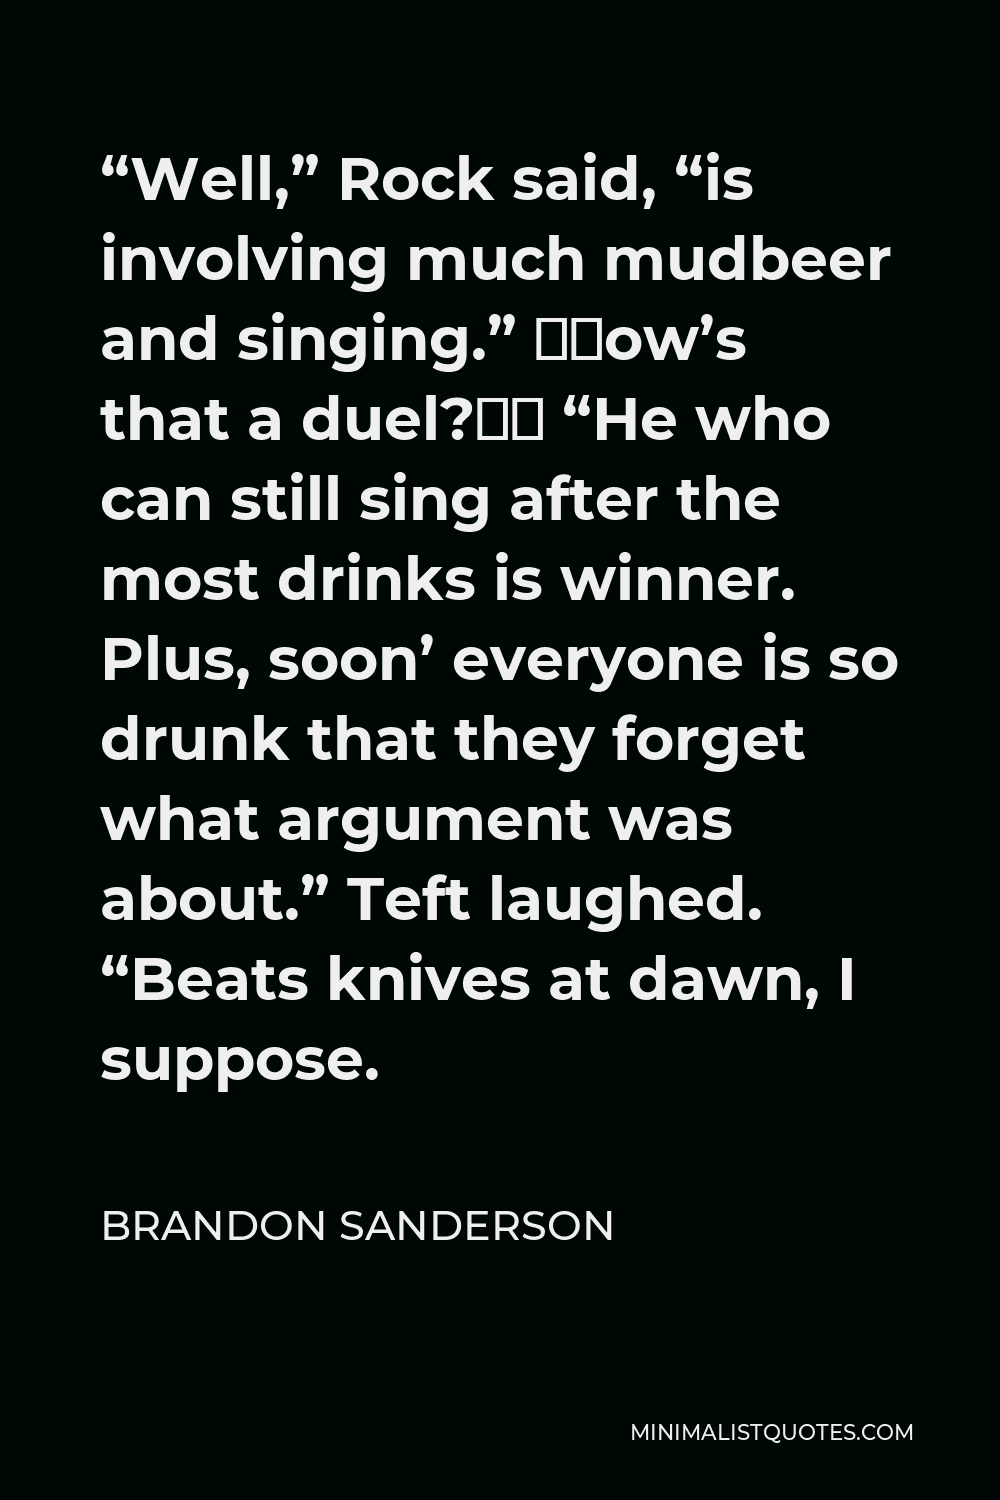 Brandon Sanderson Quote - “Well,” Rock said, “is involving much mudbeer and singing.” “How’s that a duel?” “He who can still sing after the most drinks is winner. Plus, soon’ everyone is so drunk that they forget what argument was about.” Teft laughed. “Beats knives at dawn, I suppose.